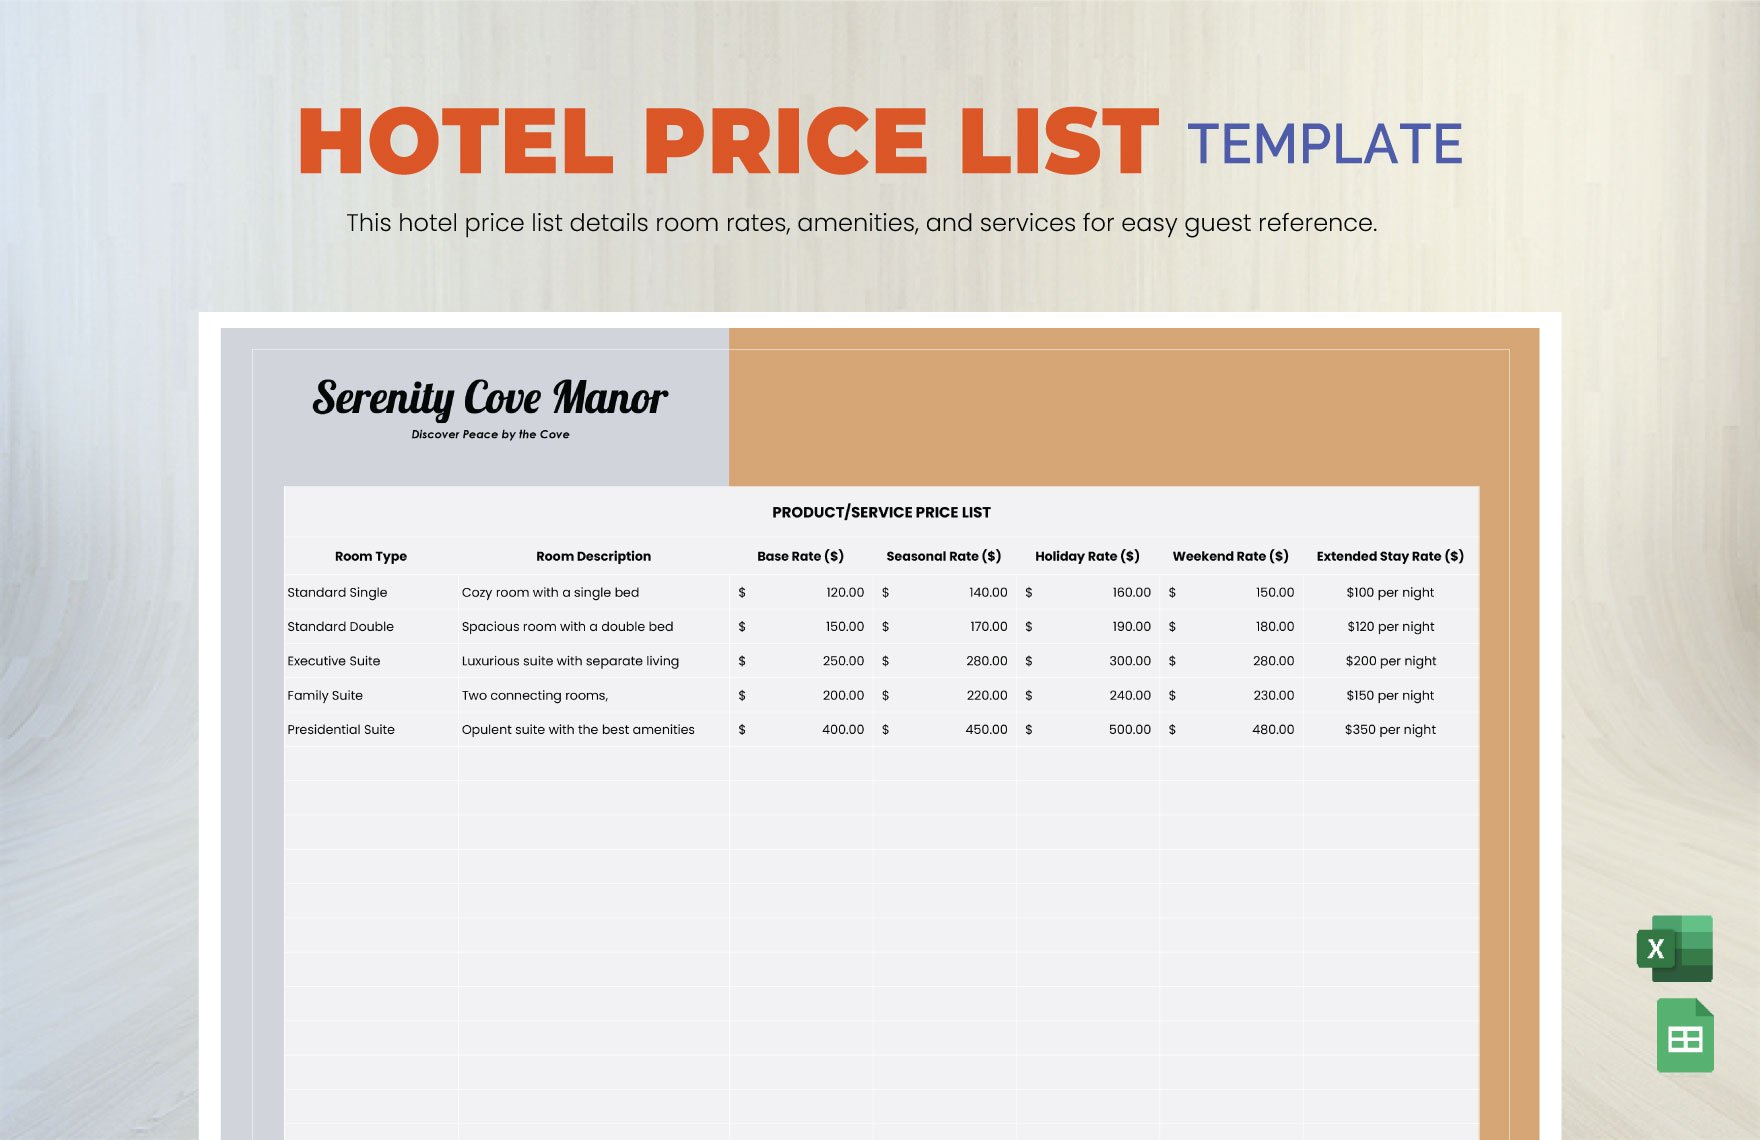 Free Hotel Price List Template in Excel, Google Sheets